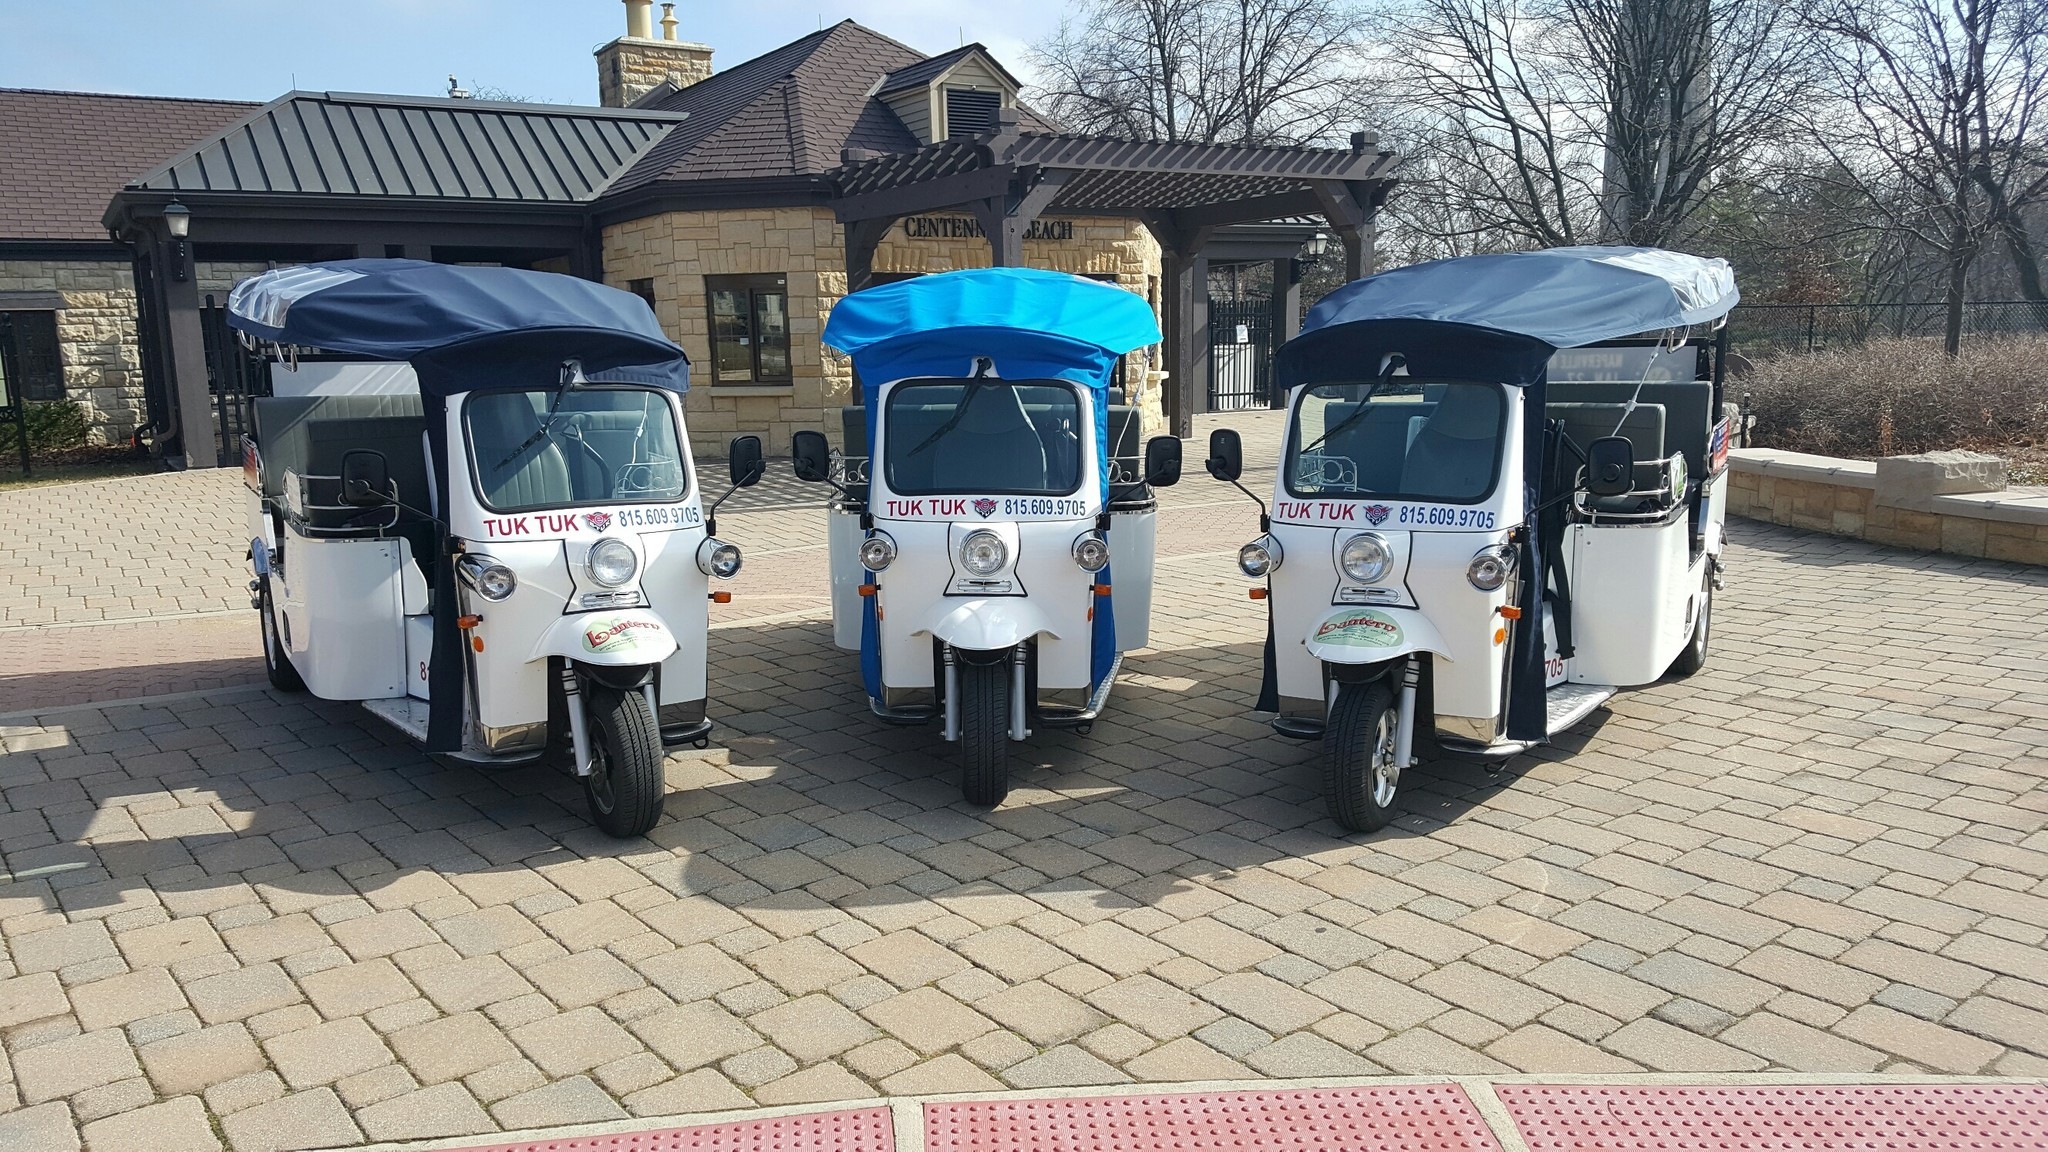 Naperville Tuk Tuk fleet doubles in size in less than a year ...